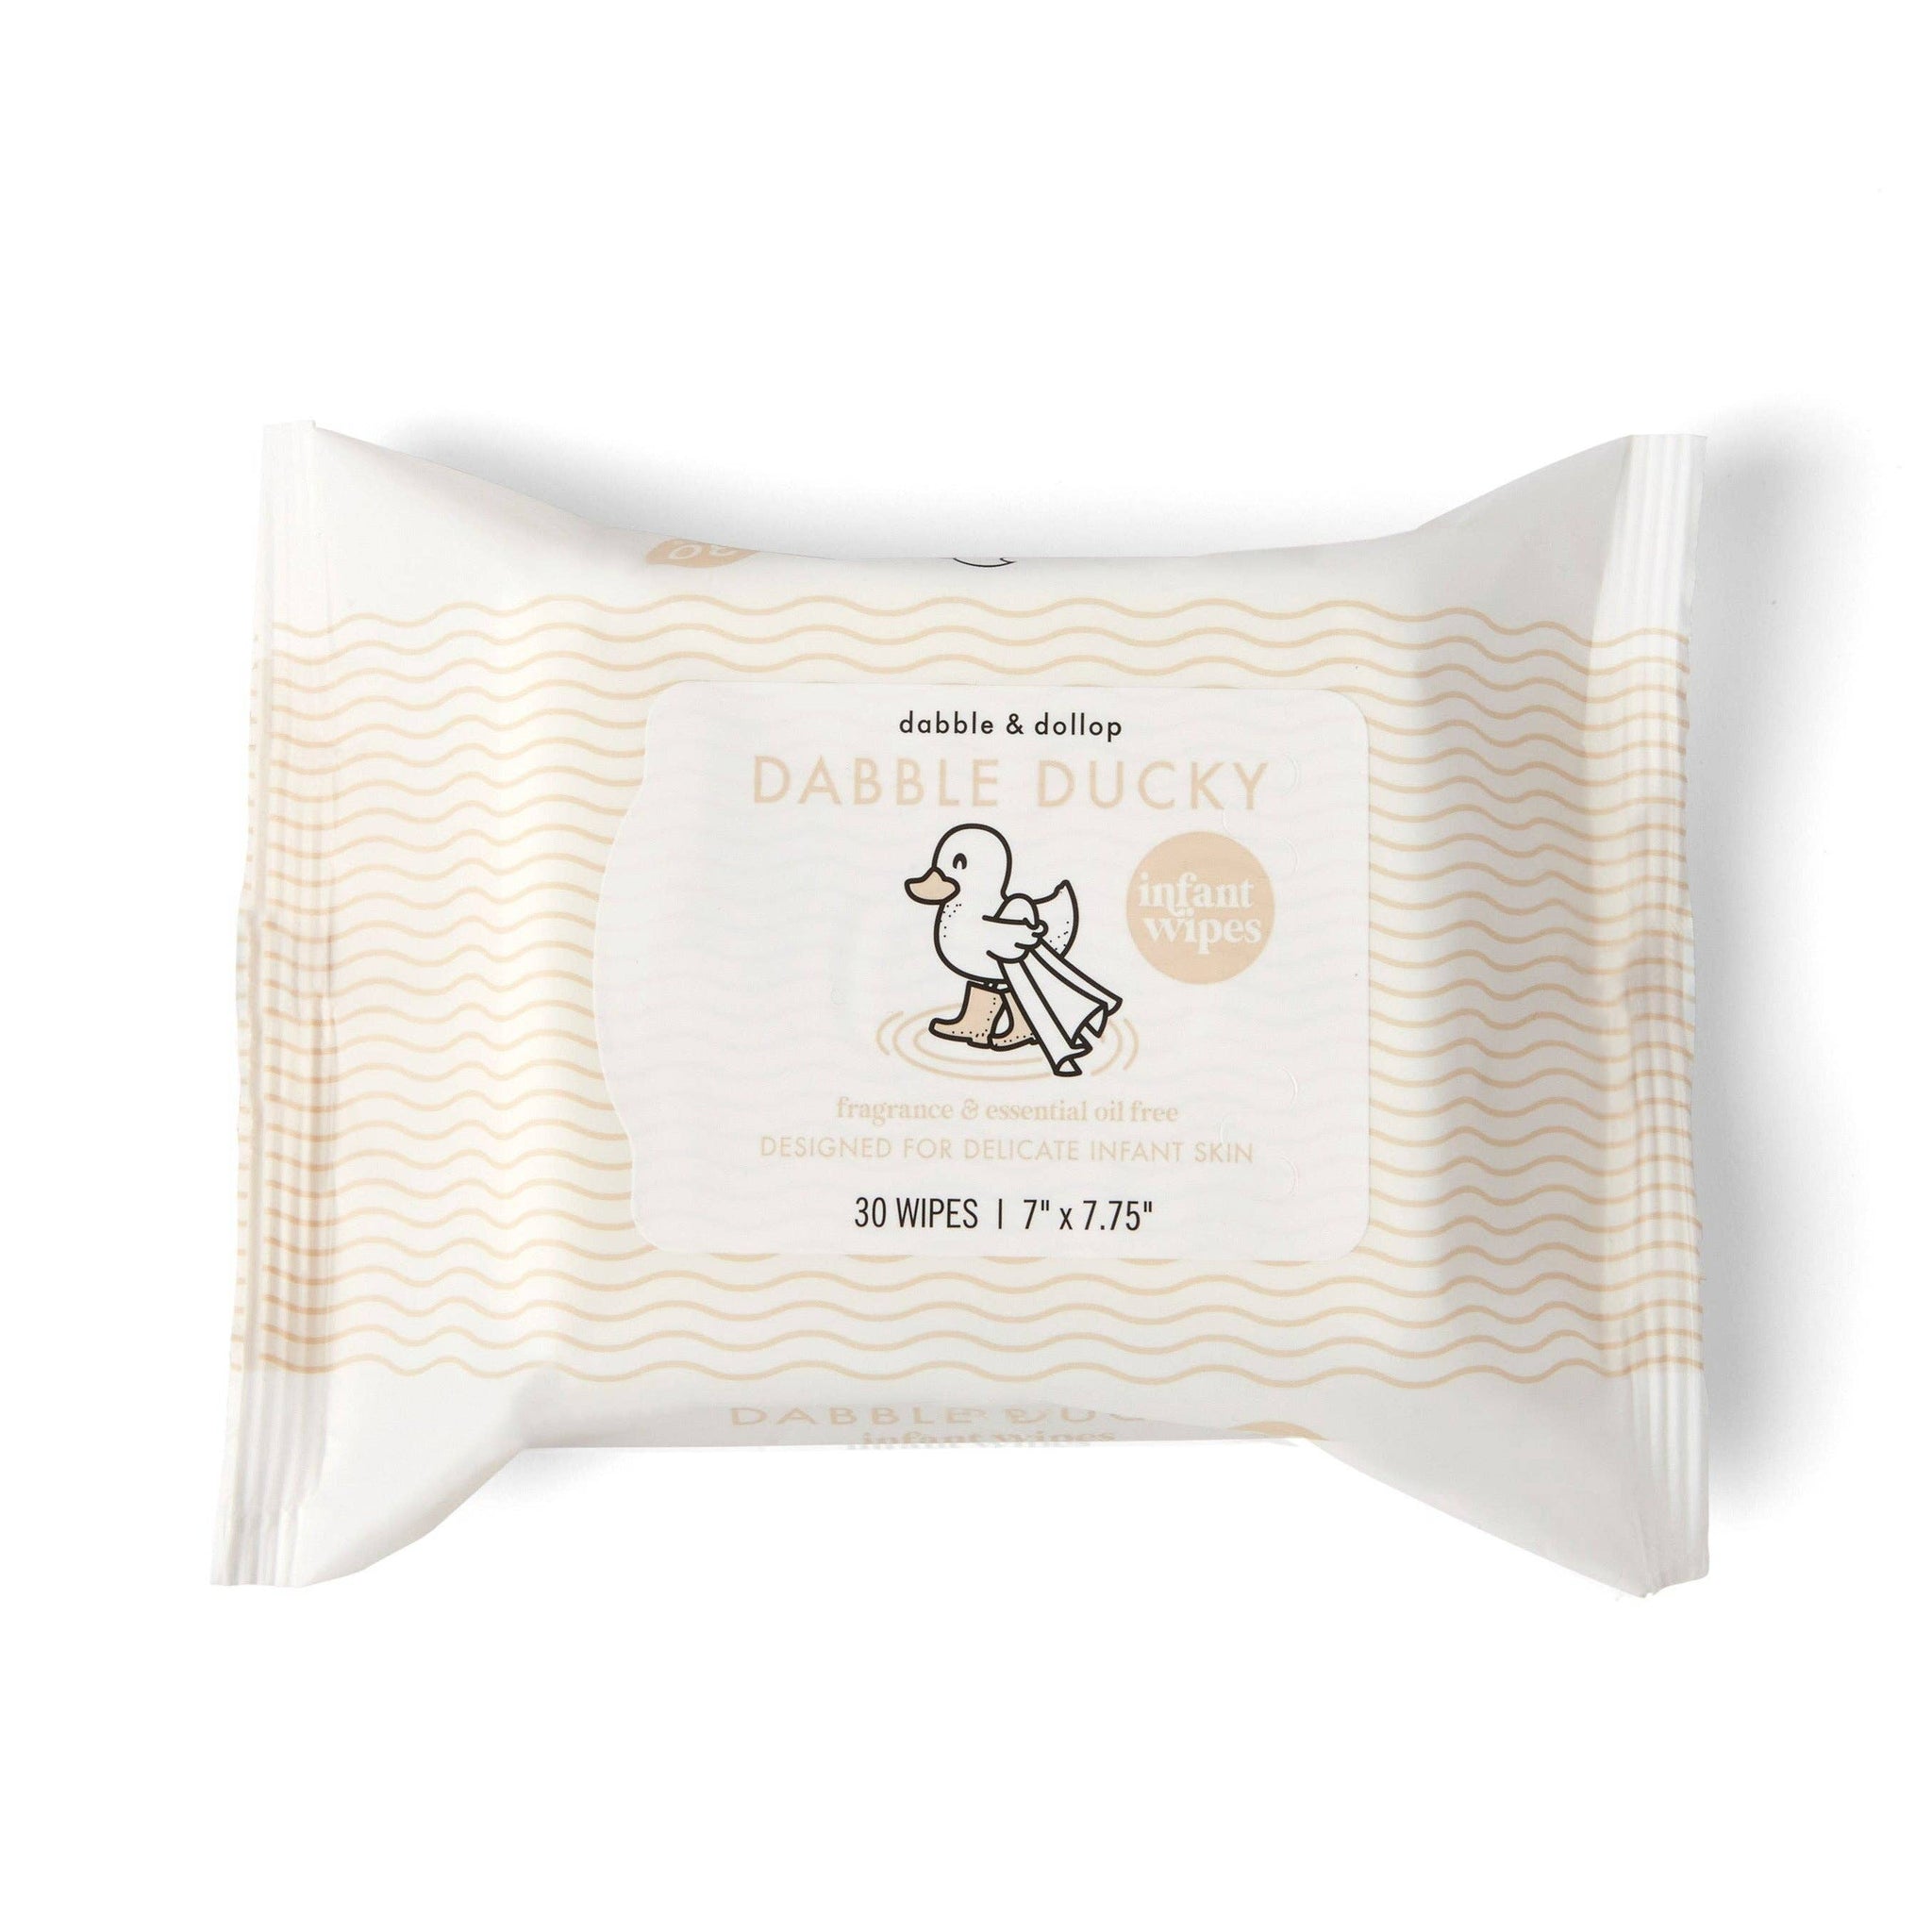 Dabble Ducky Fragrance-Free Infant Wipes